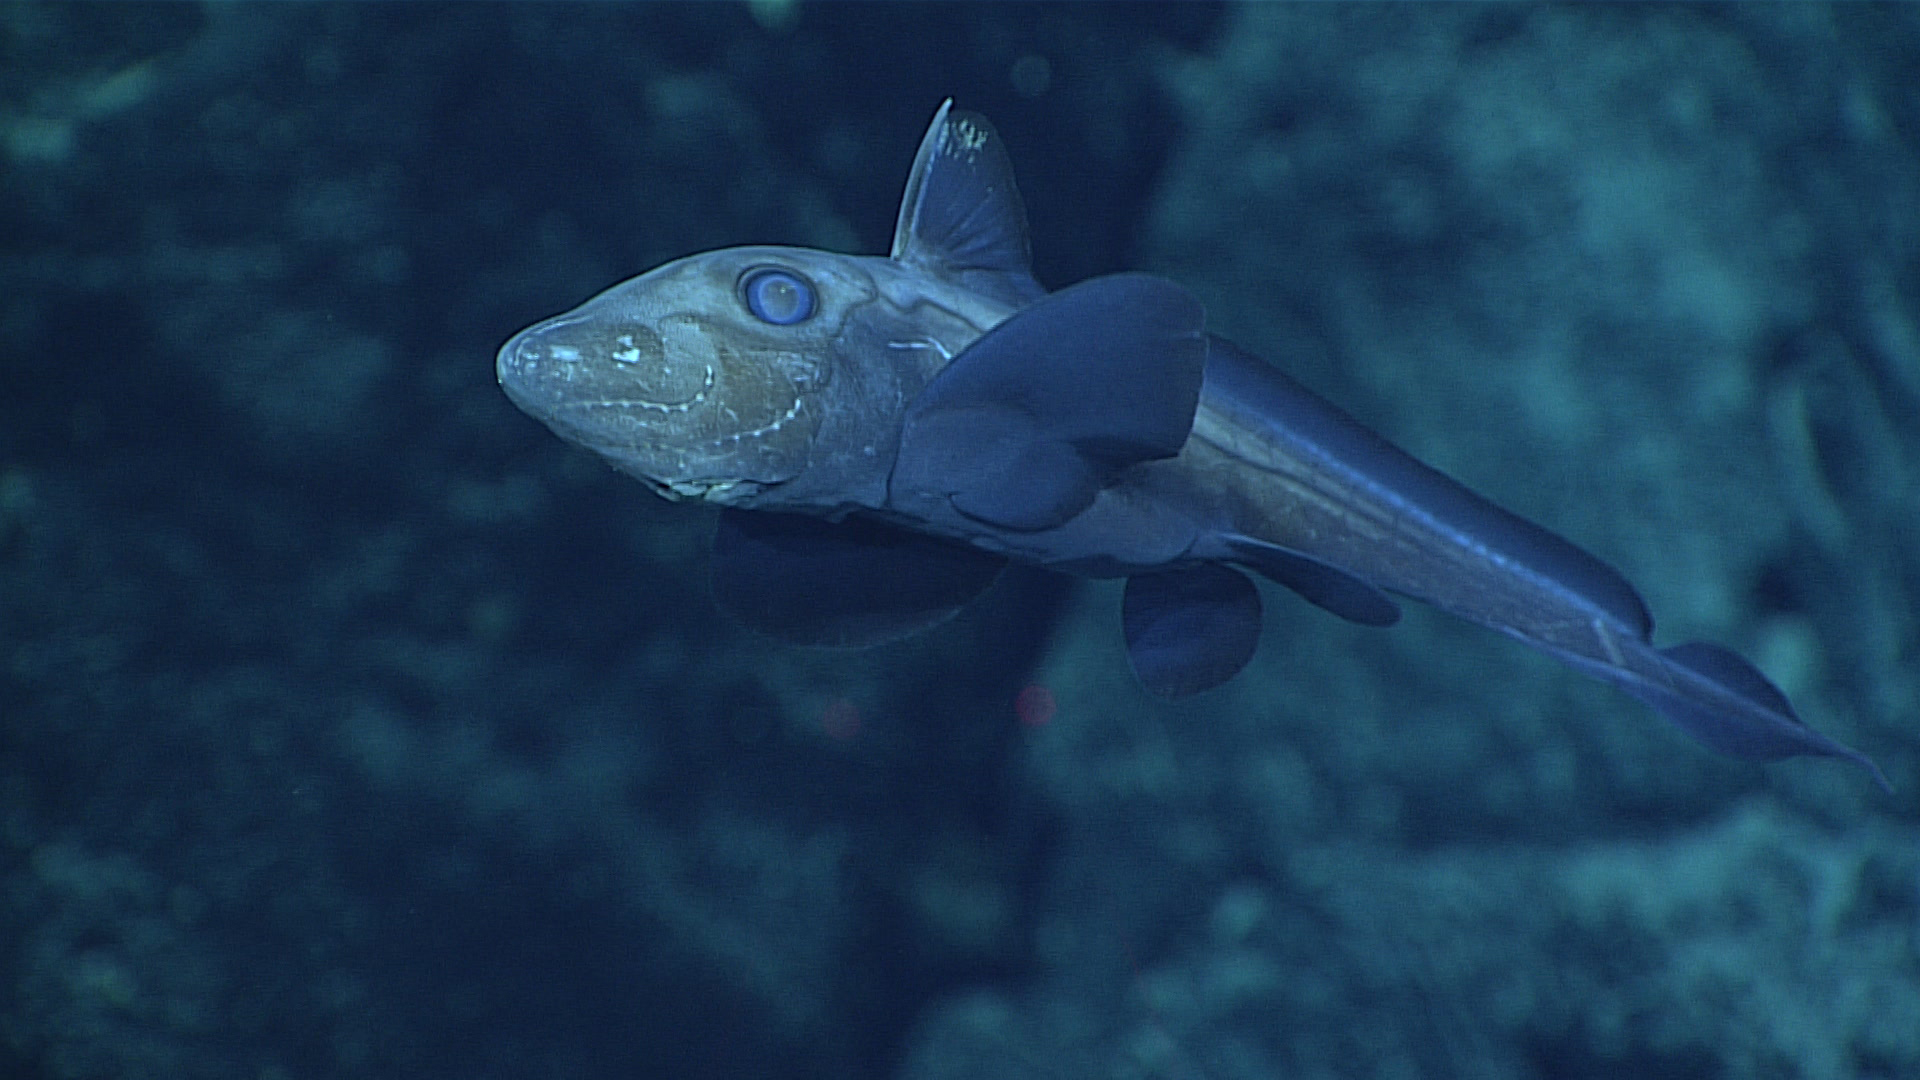 An almost camouflaged grey-white fish against a blue-grey background, with two fins, white face and eyes with silver dots running along it